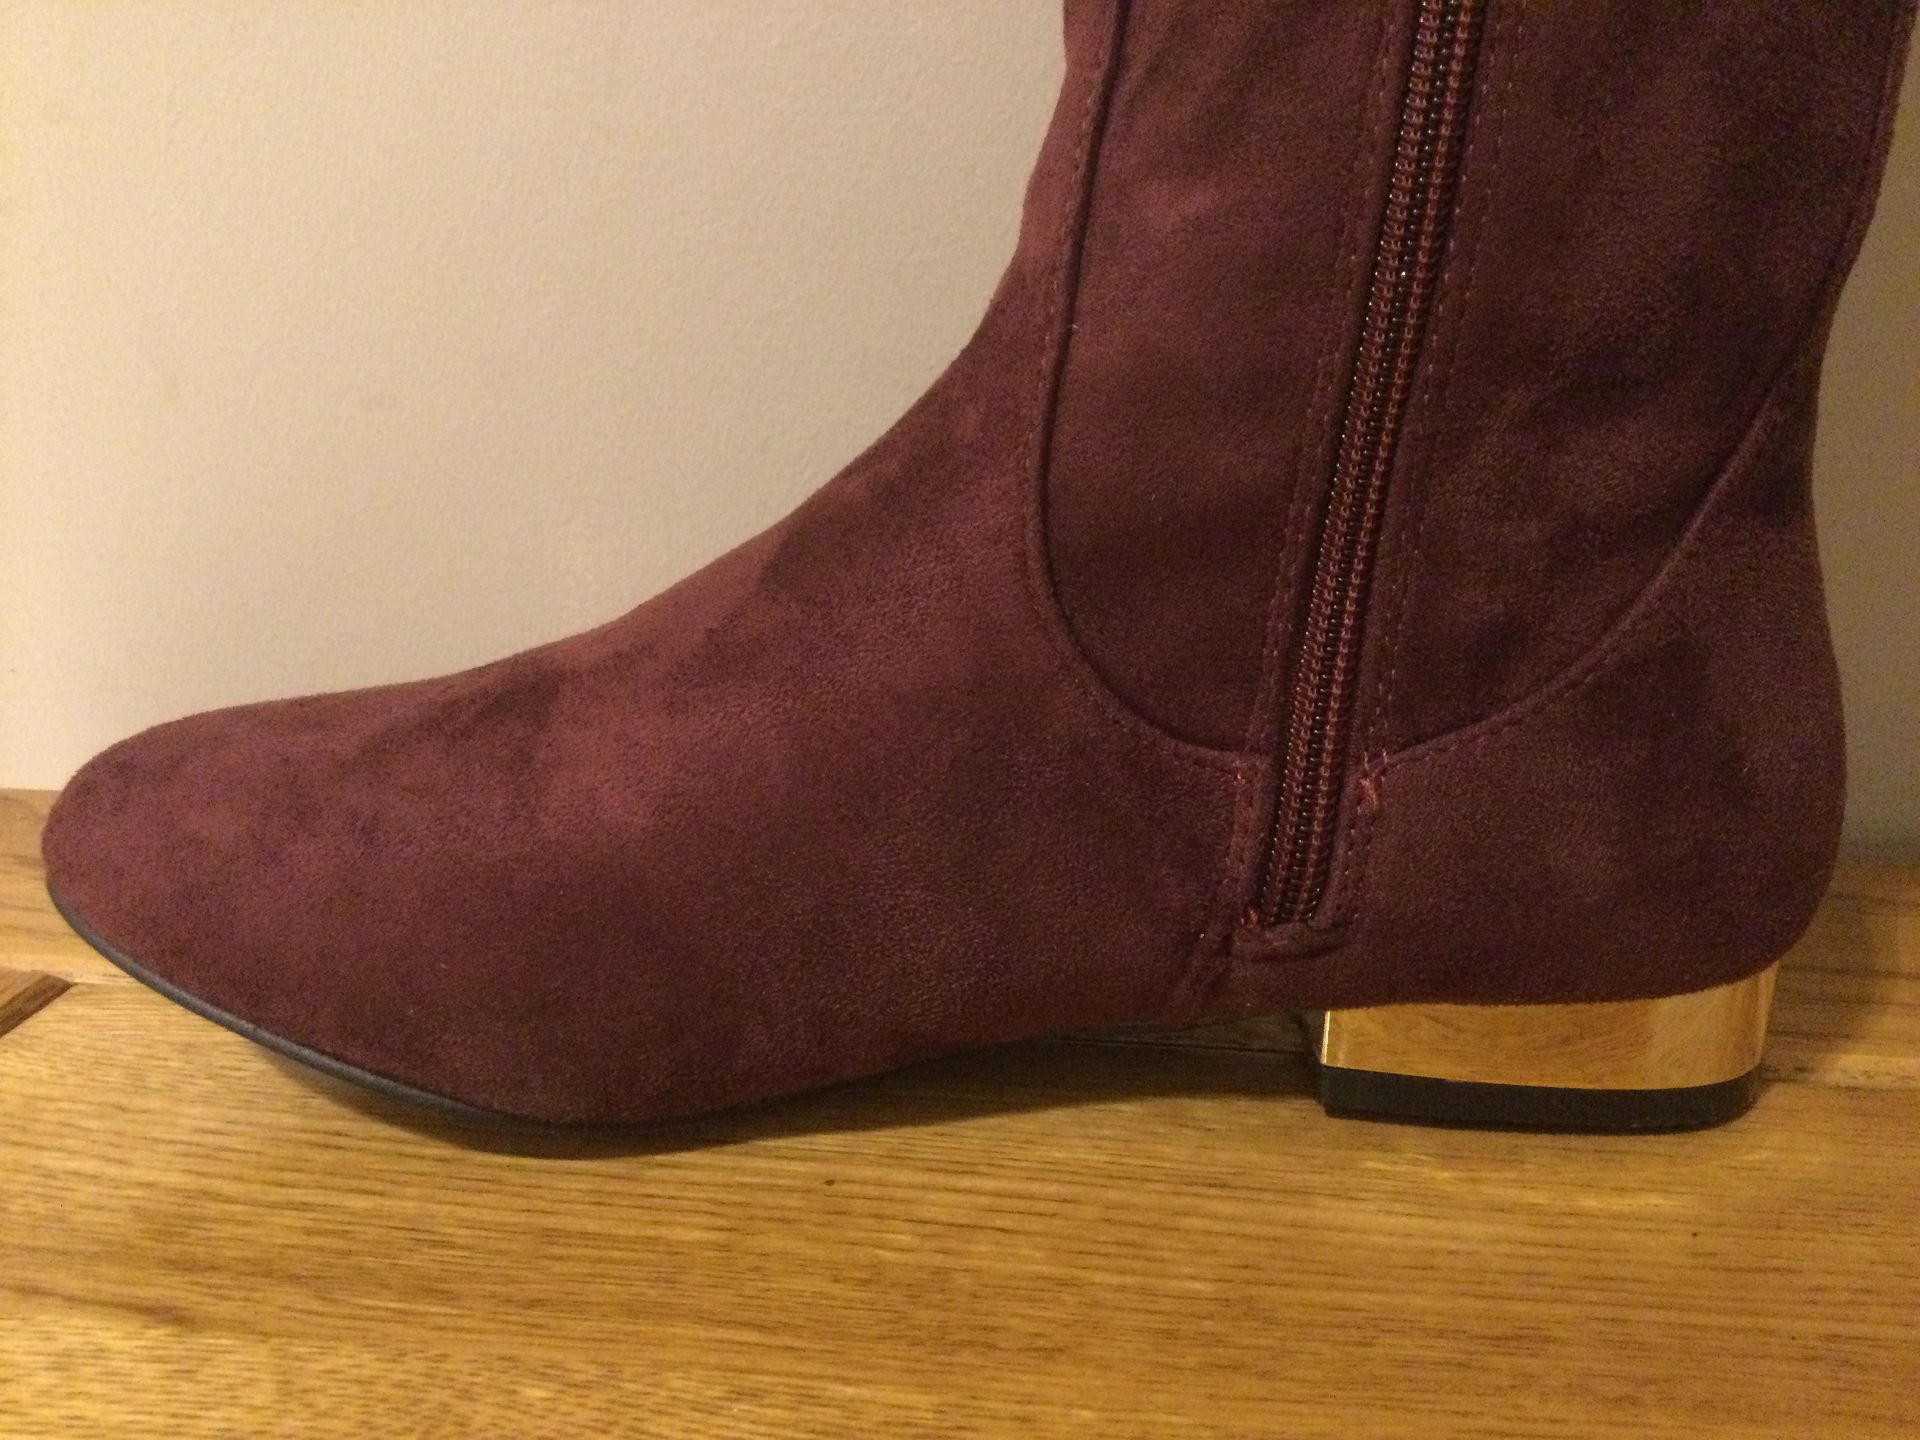 Dolcis “Katie” Long Boots, Low Heel, Size 4, Burgundy - New RRP £55.00 - Image 3 of 7